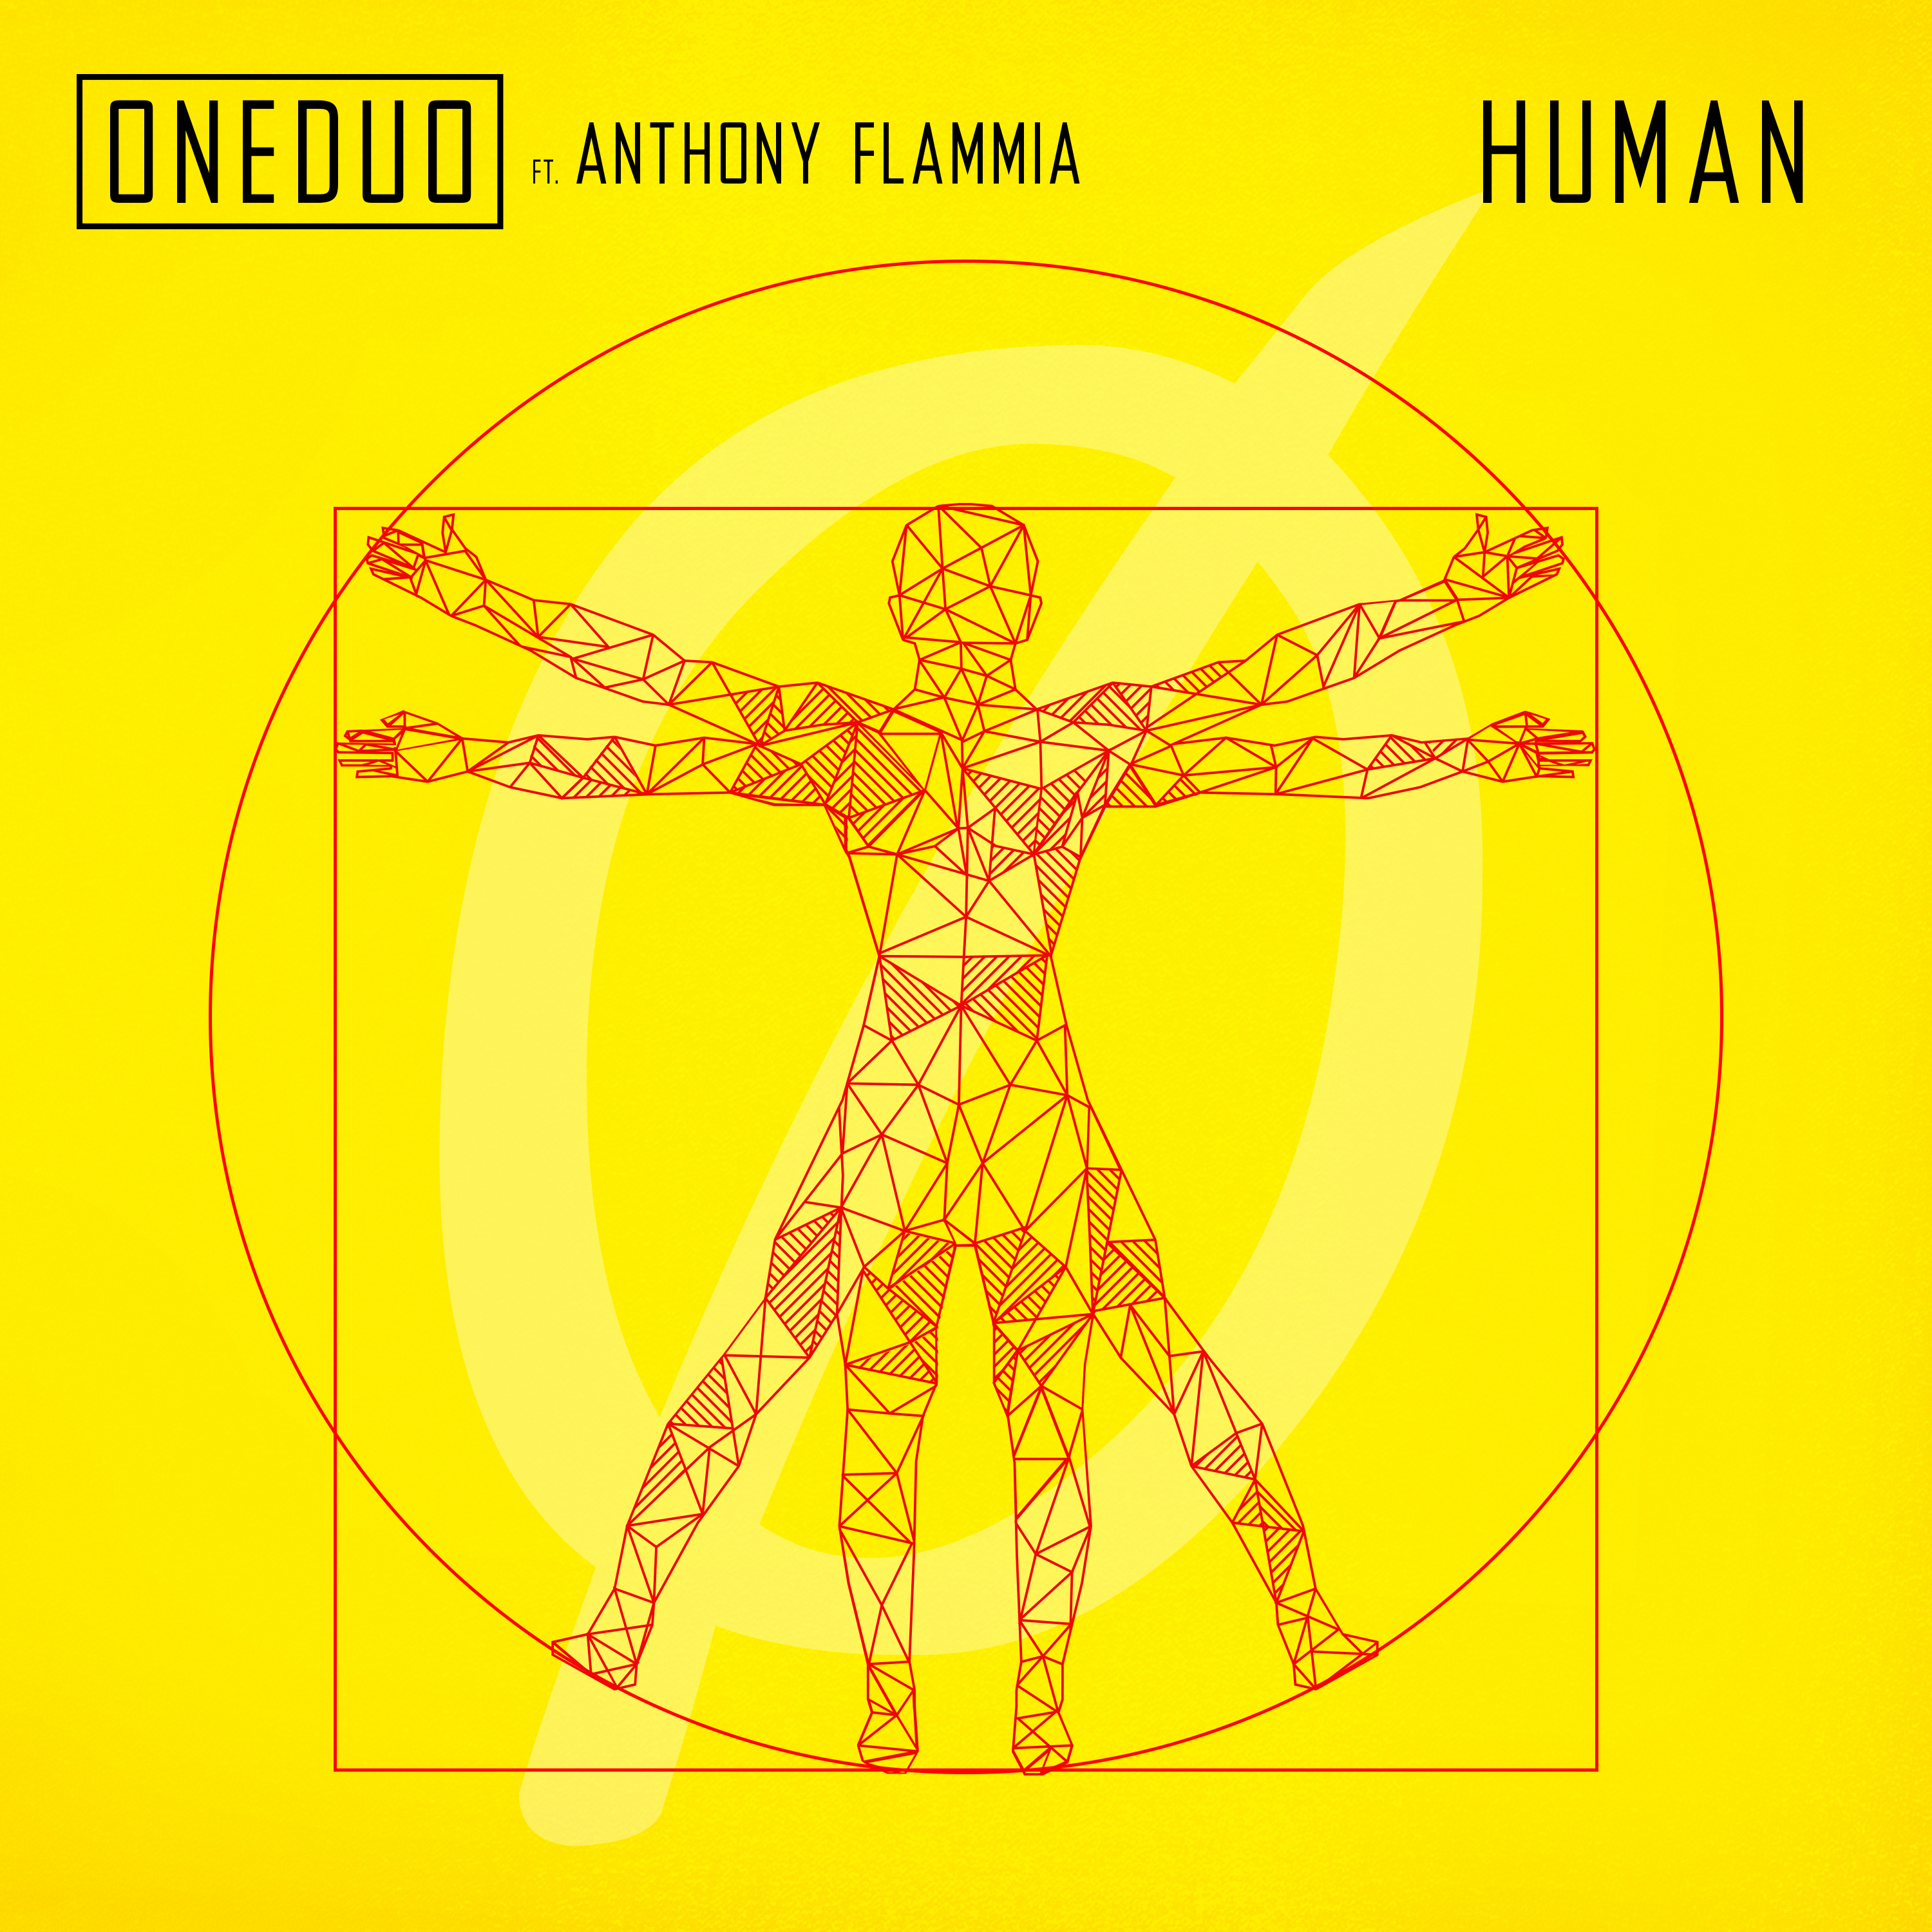 Art for Human  by ONEDUO (feat. Anthony Flammia)